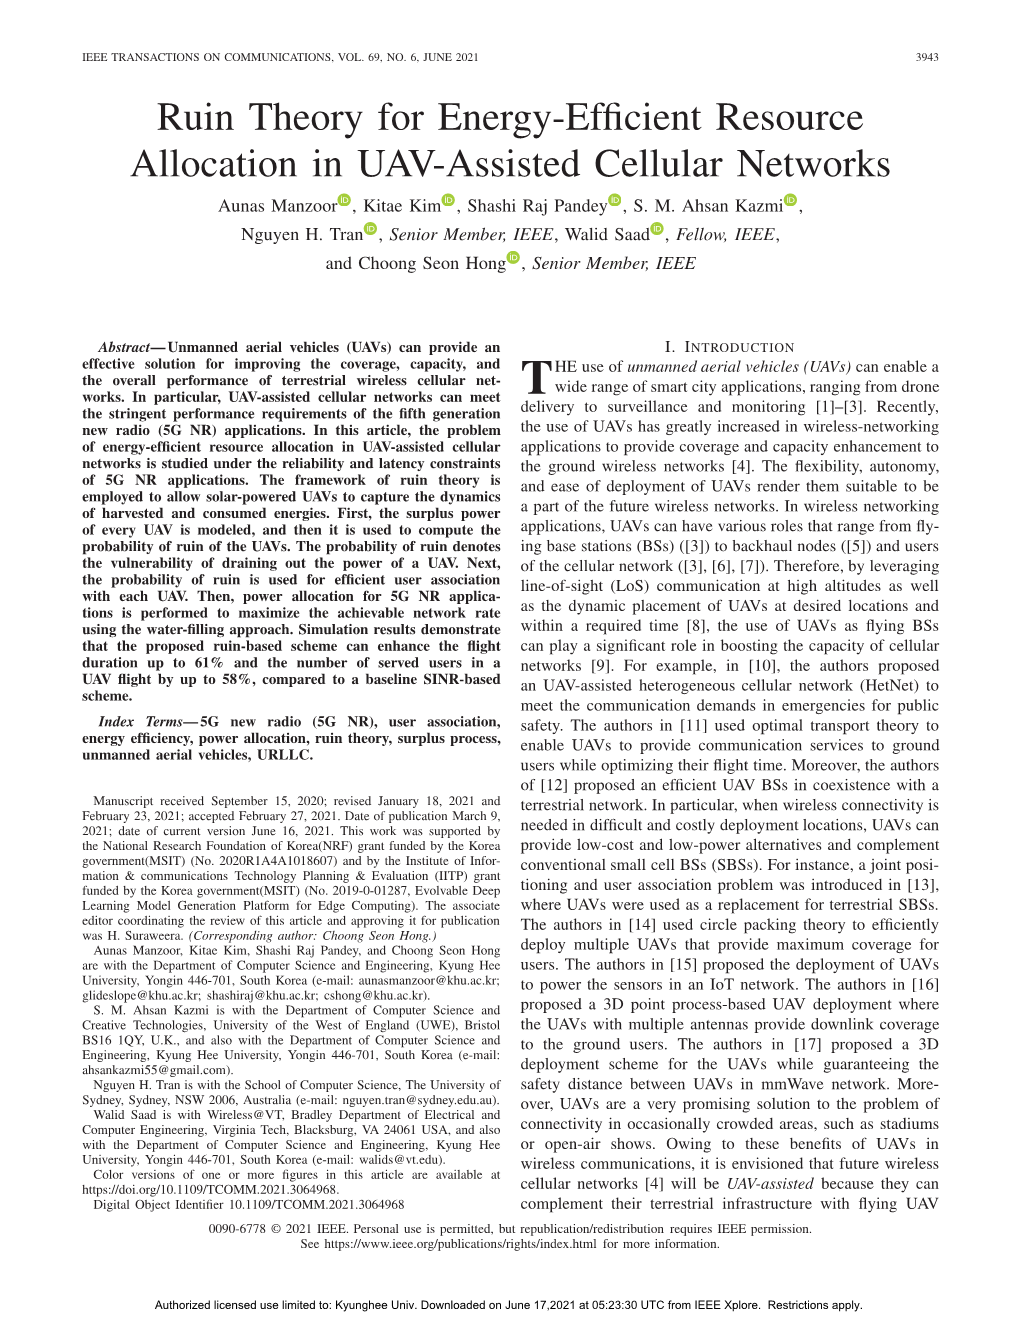 RUIN THEORY for ENERGY-EFFICIENT RESOURCE ALLOCATION in UAV-ASSISTED CELLULAR NETWORKS 3945 Cellular Networks and Meet 5G NR Performance Requirements